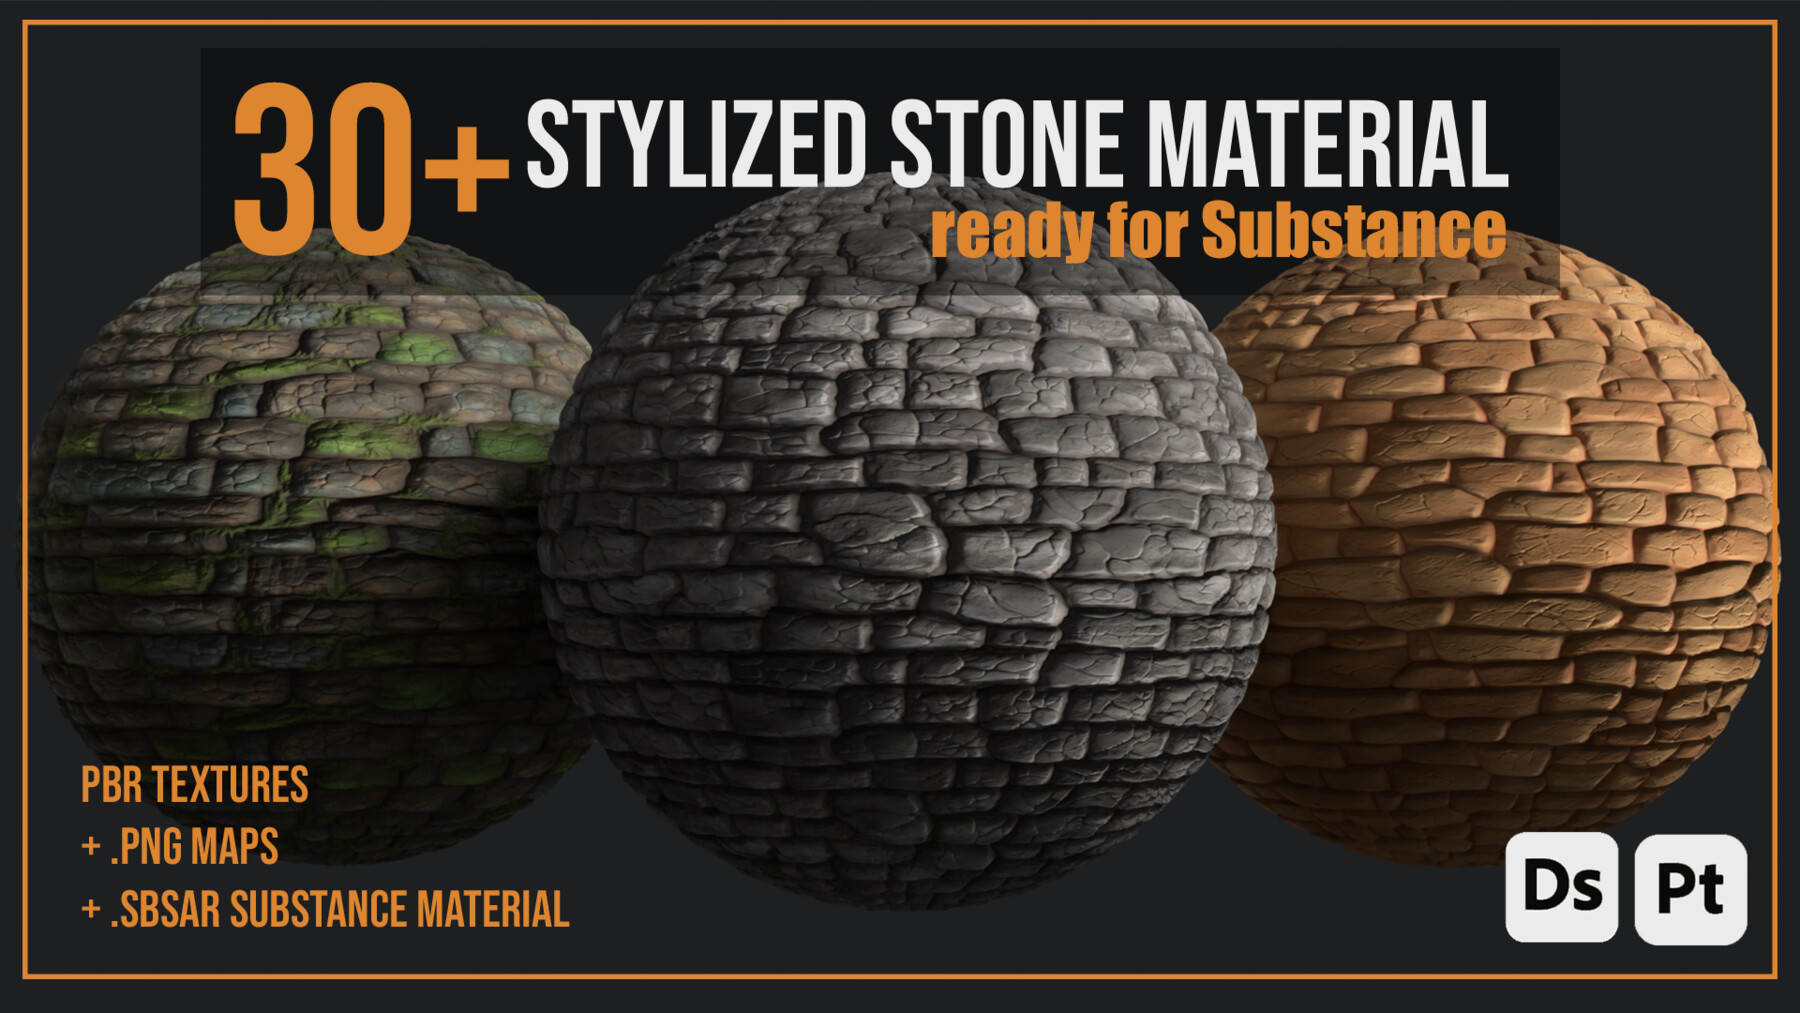 ArtStation - 30+ Stylized Rock Materials - PBR rendering | Resources